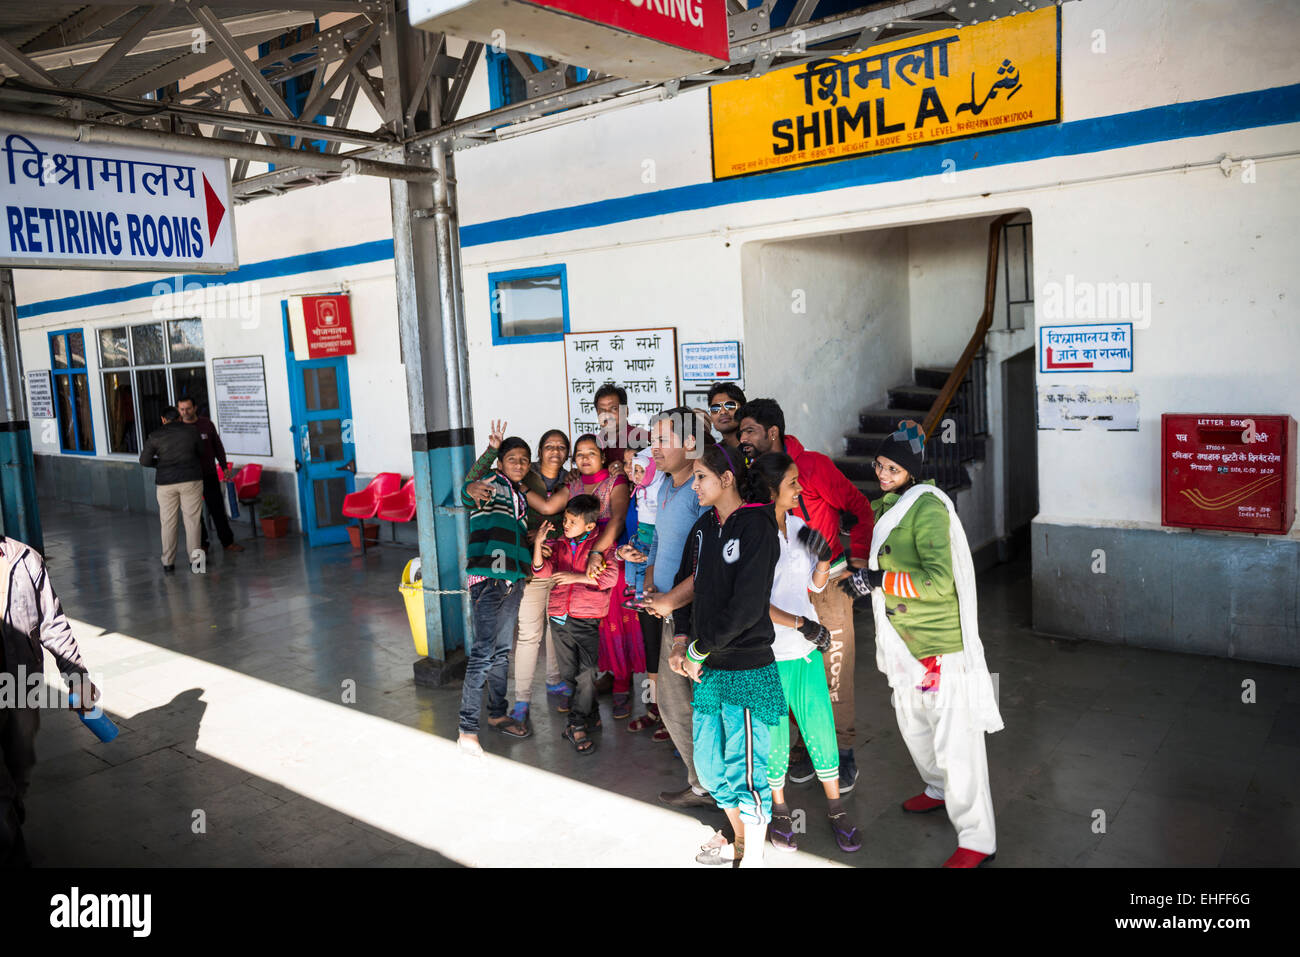 Indian families about to depart Shimla on the toy train, Himachal Pradesh, India Stock Photo